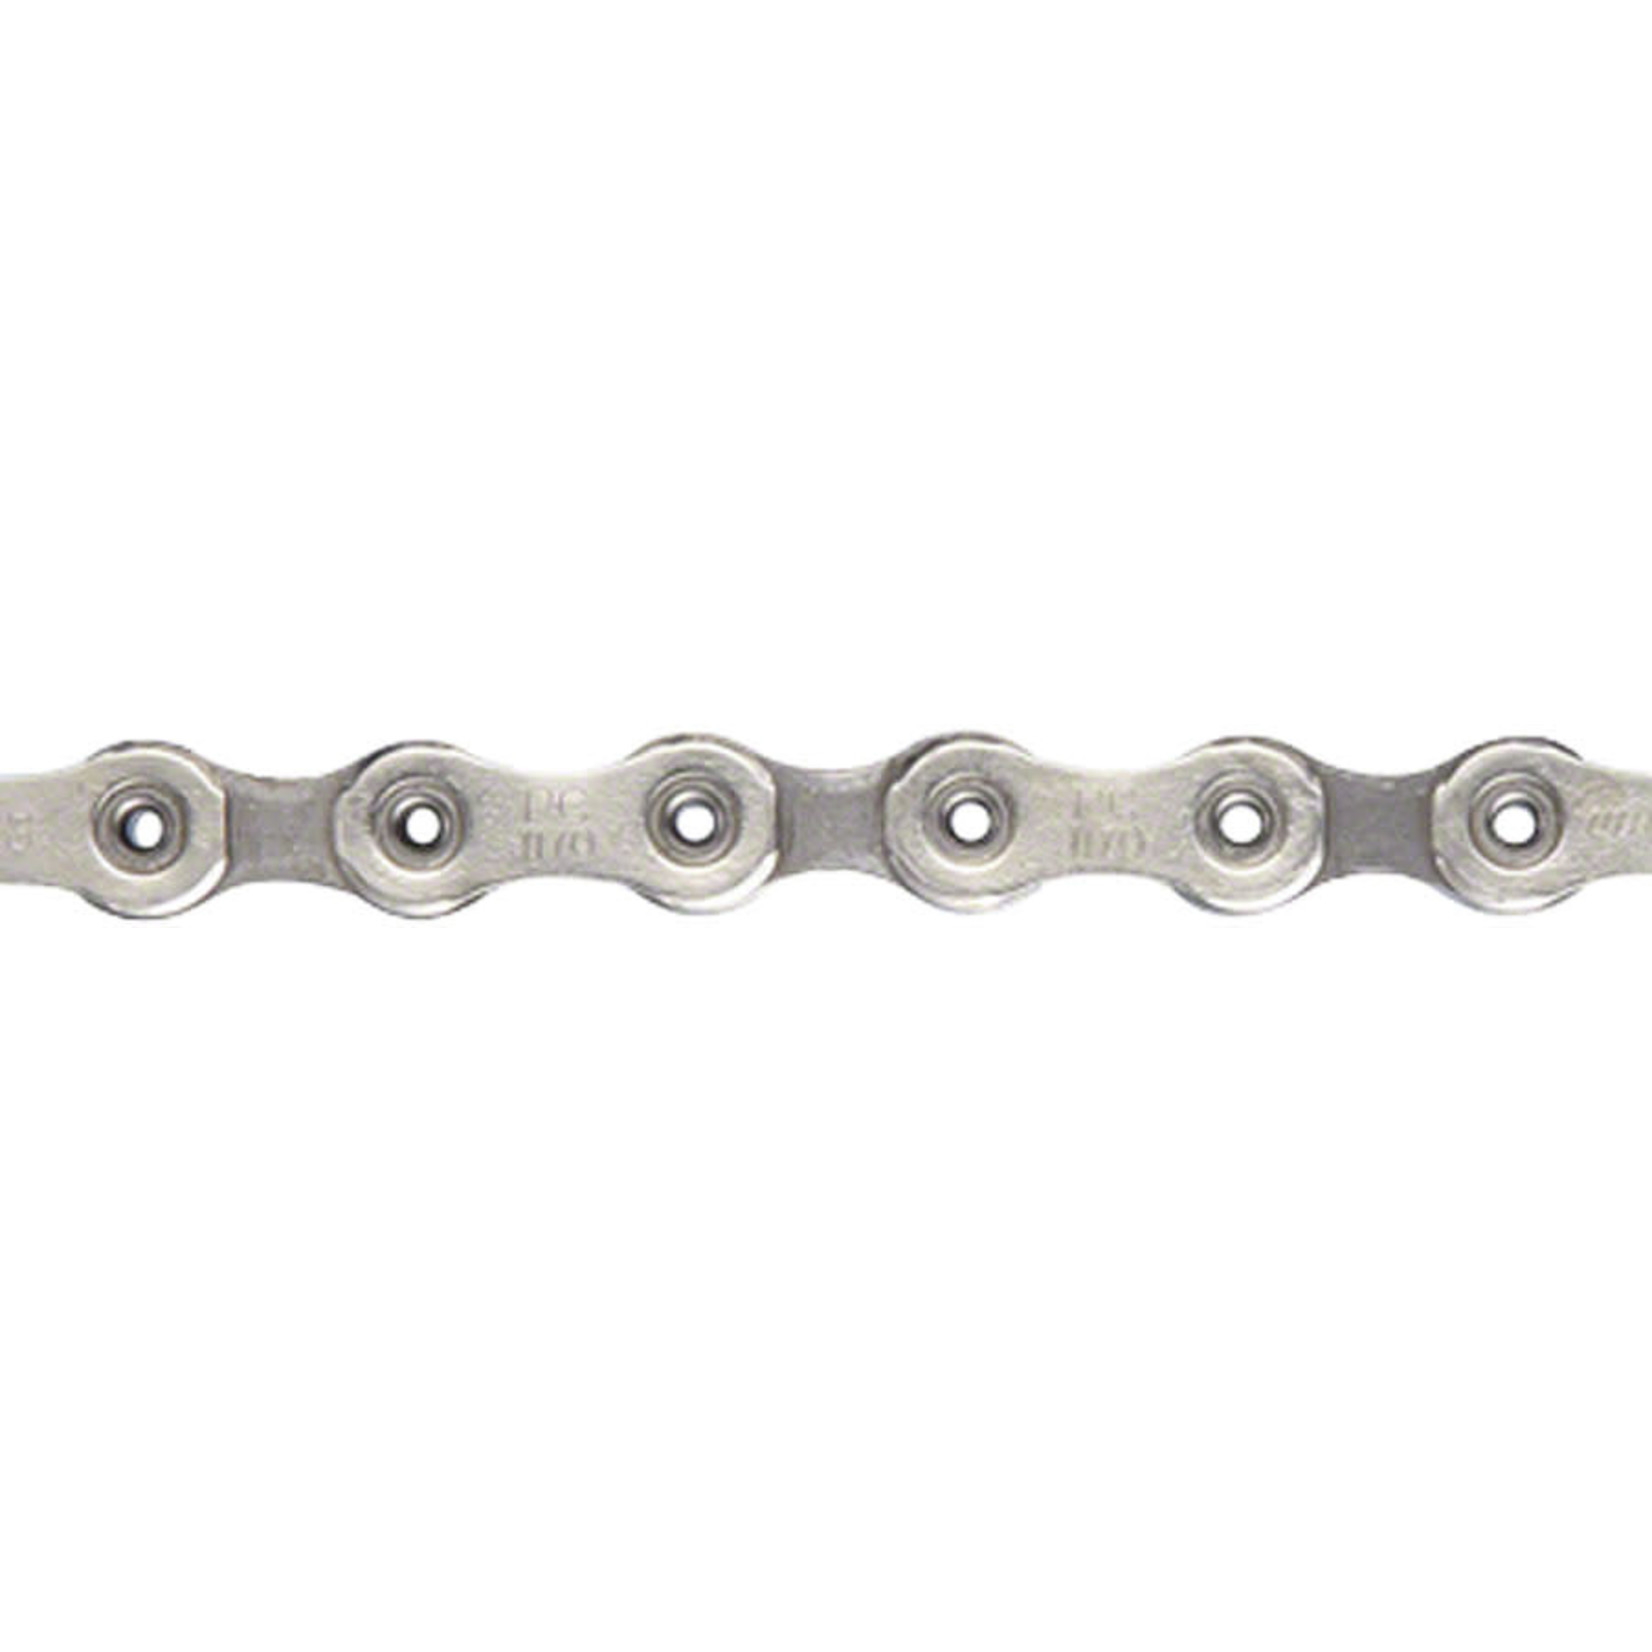 Sram Red 22 Chain - 11-Speed, 114 Links, Silver